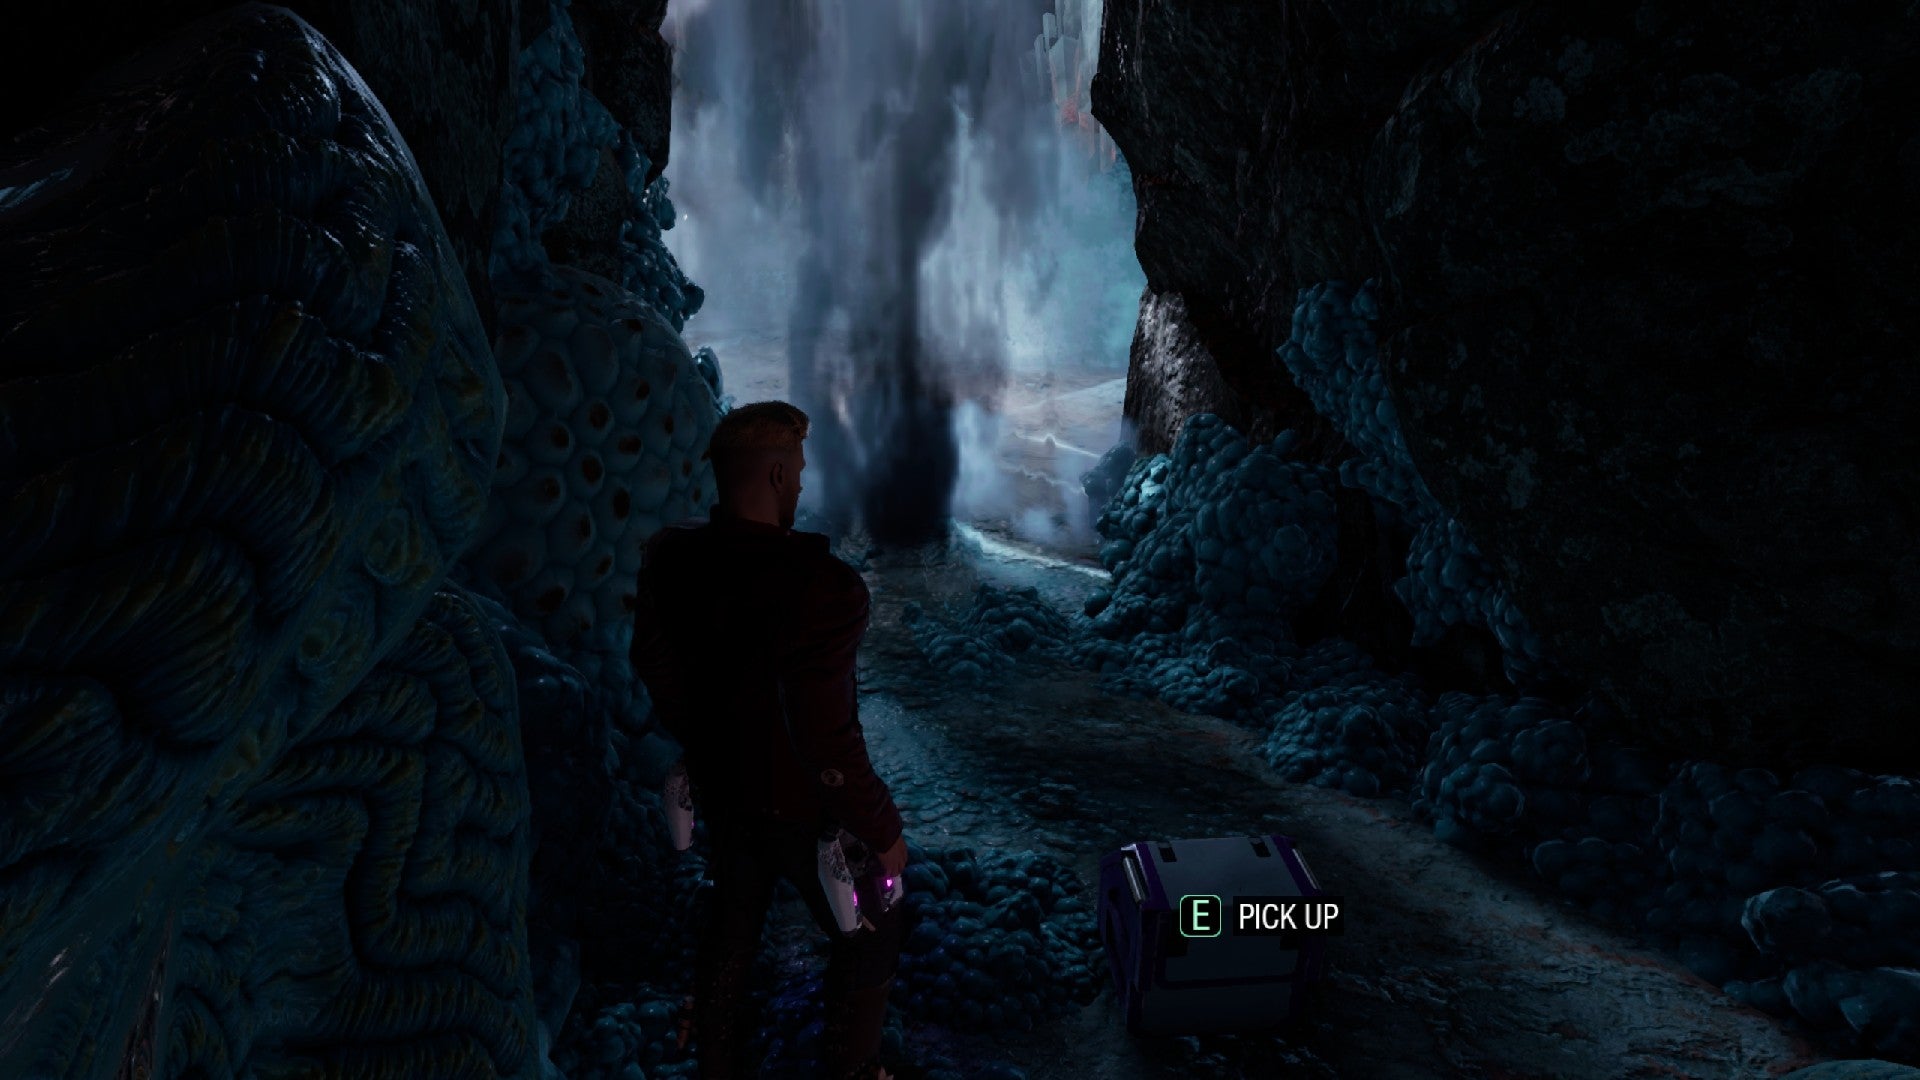 Star-Lord stood next to outfit box inside a waterfall.